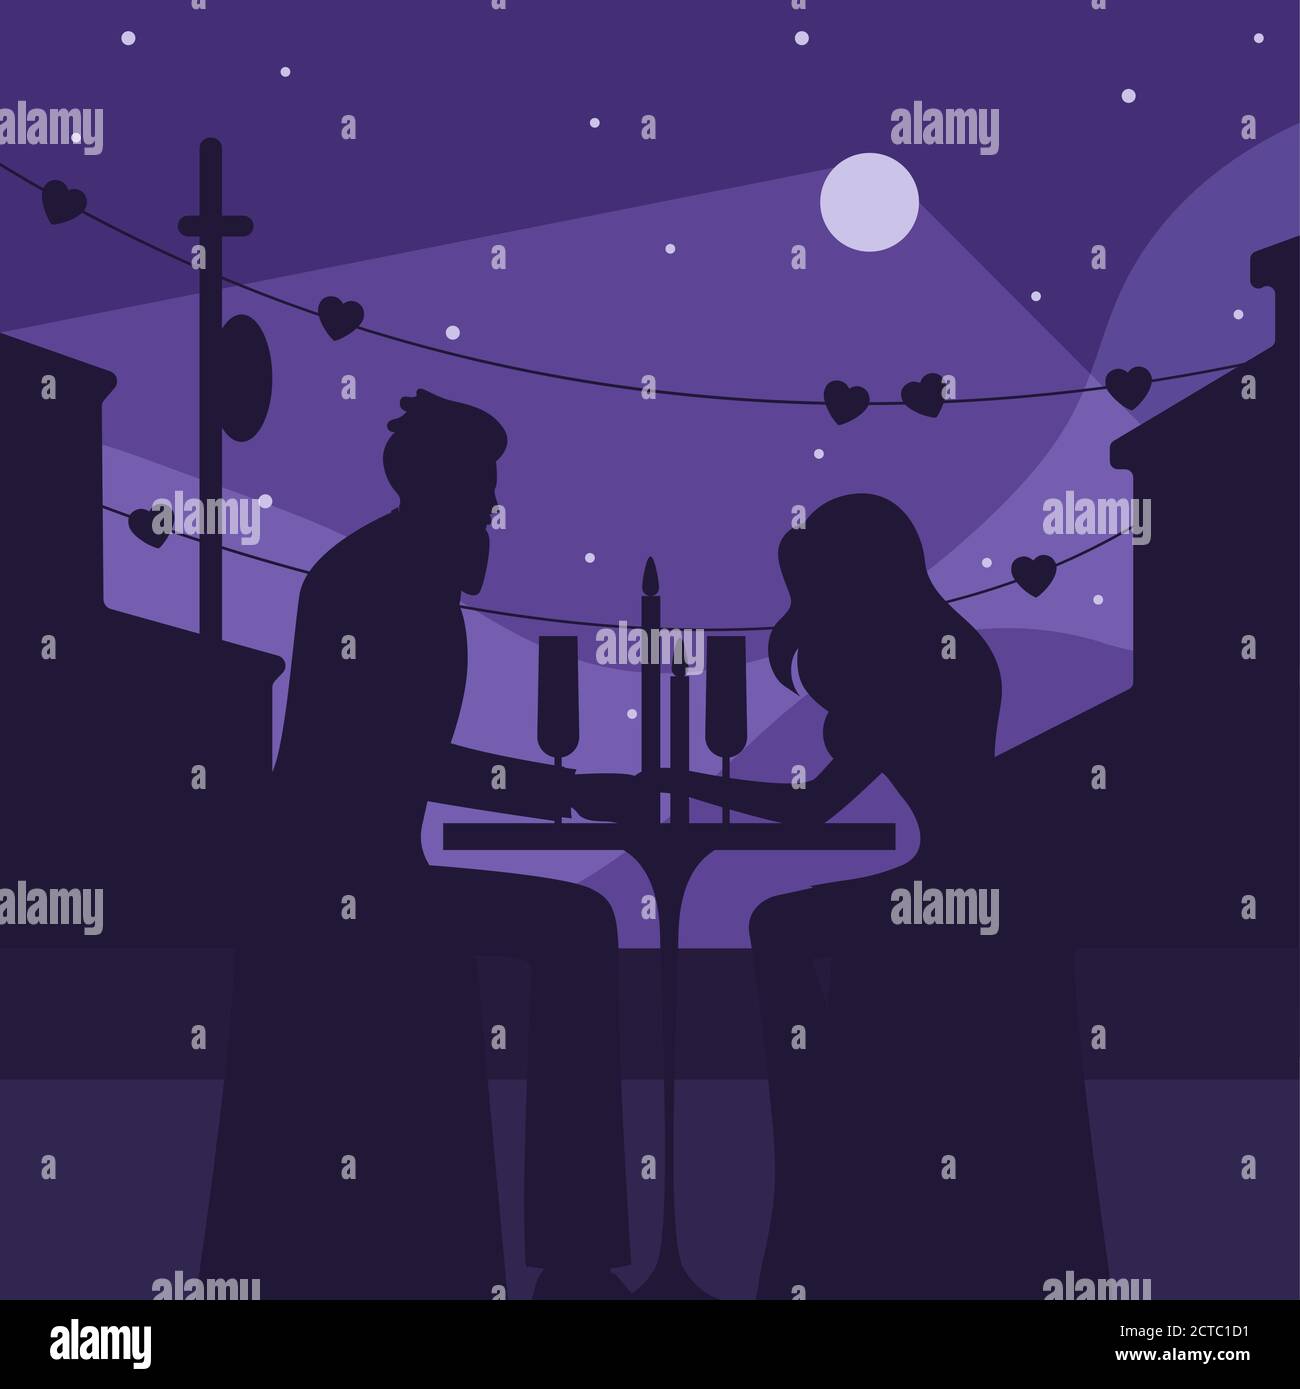 Romantic dinner with moon silhouette illustration. Characters in love sit restaurant table with candles in open area. Stock Vector